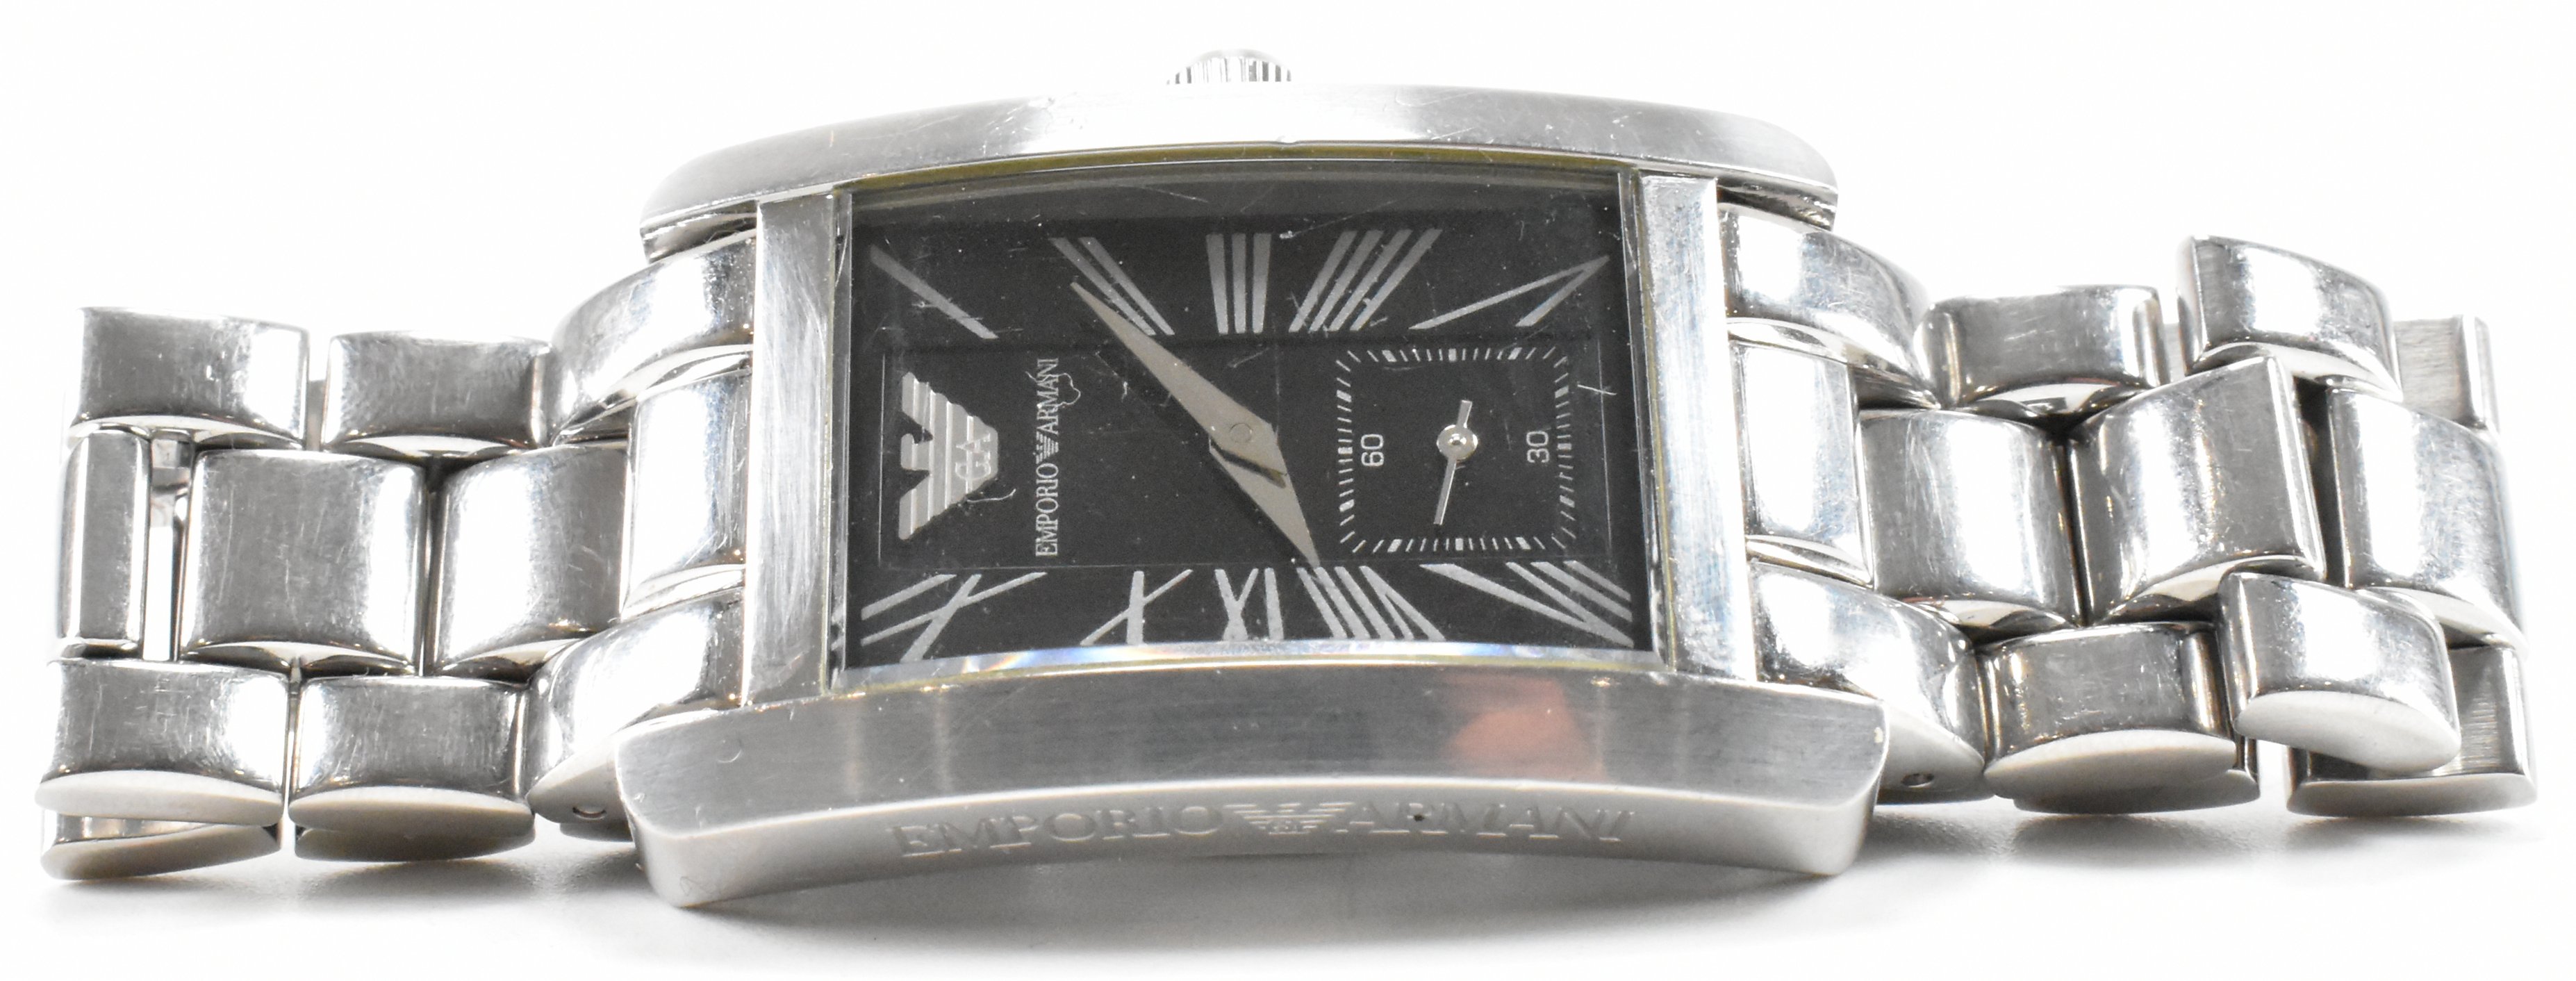 EMPORIO ARMANI STAINLESS STEEL WRIST WATCH - Image 3 of 13